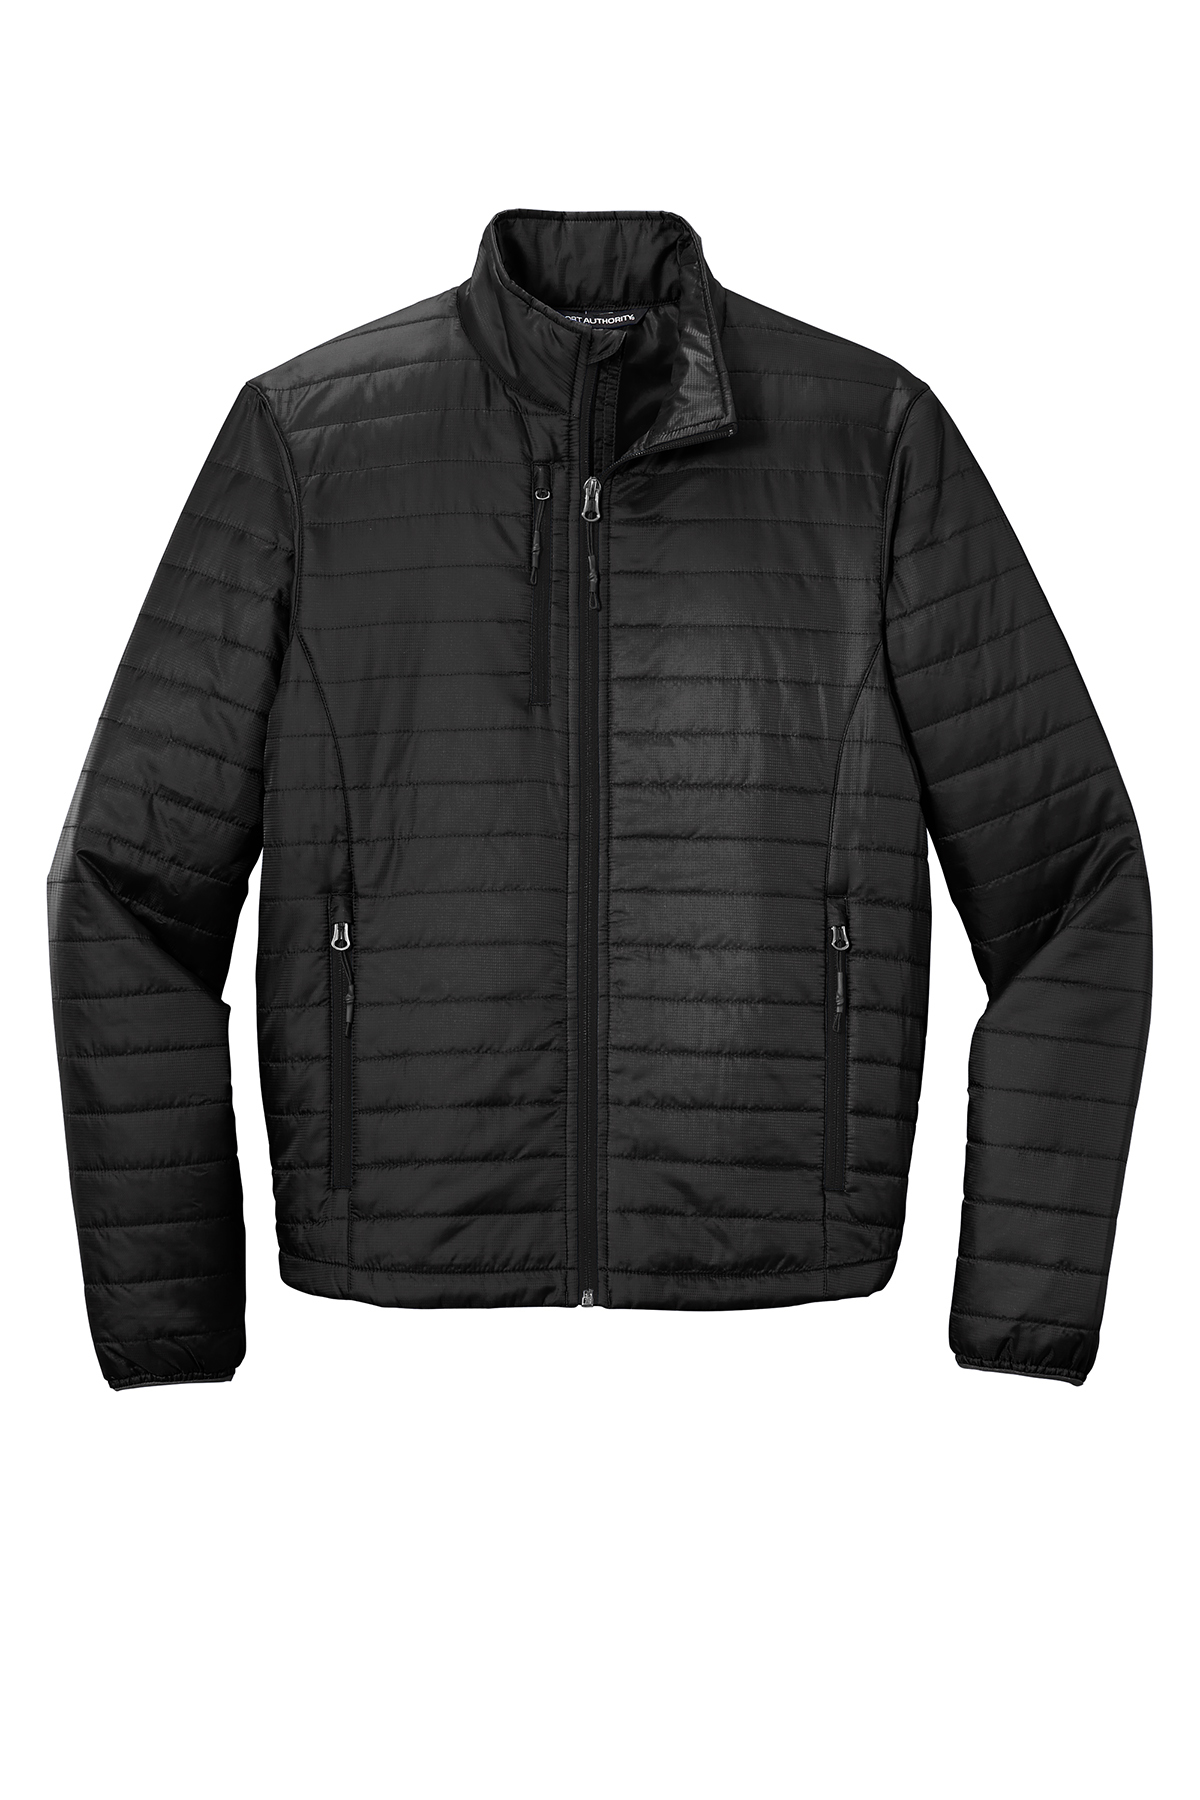 Port Authority J850 - Packable Puffy Jacket